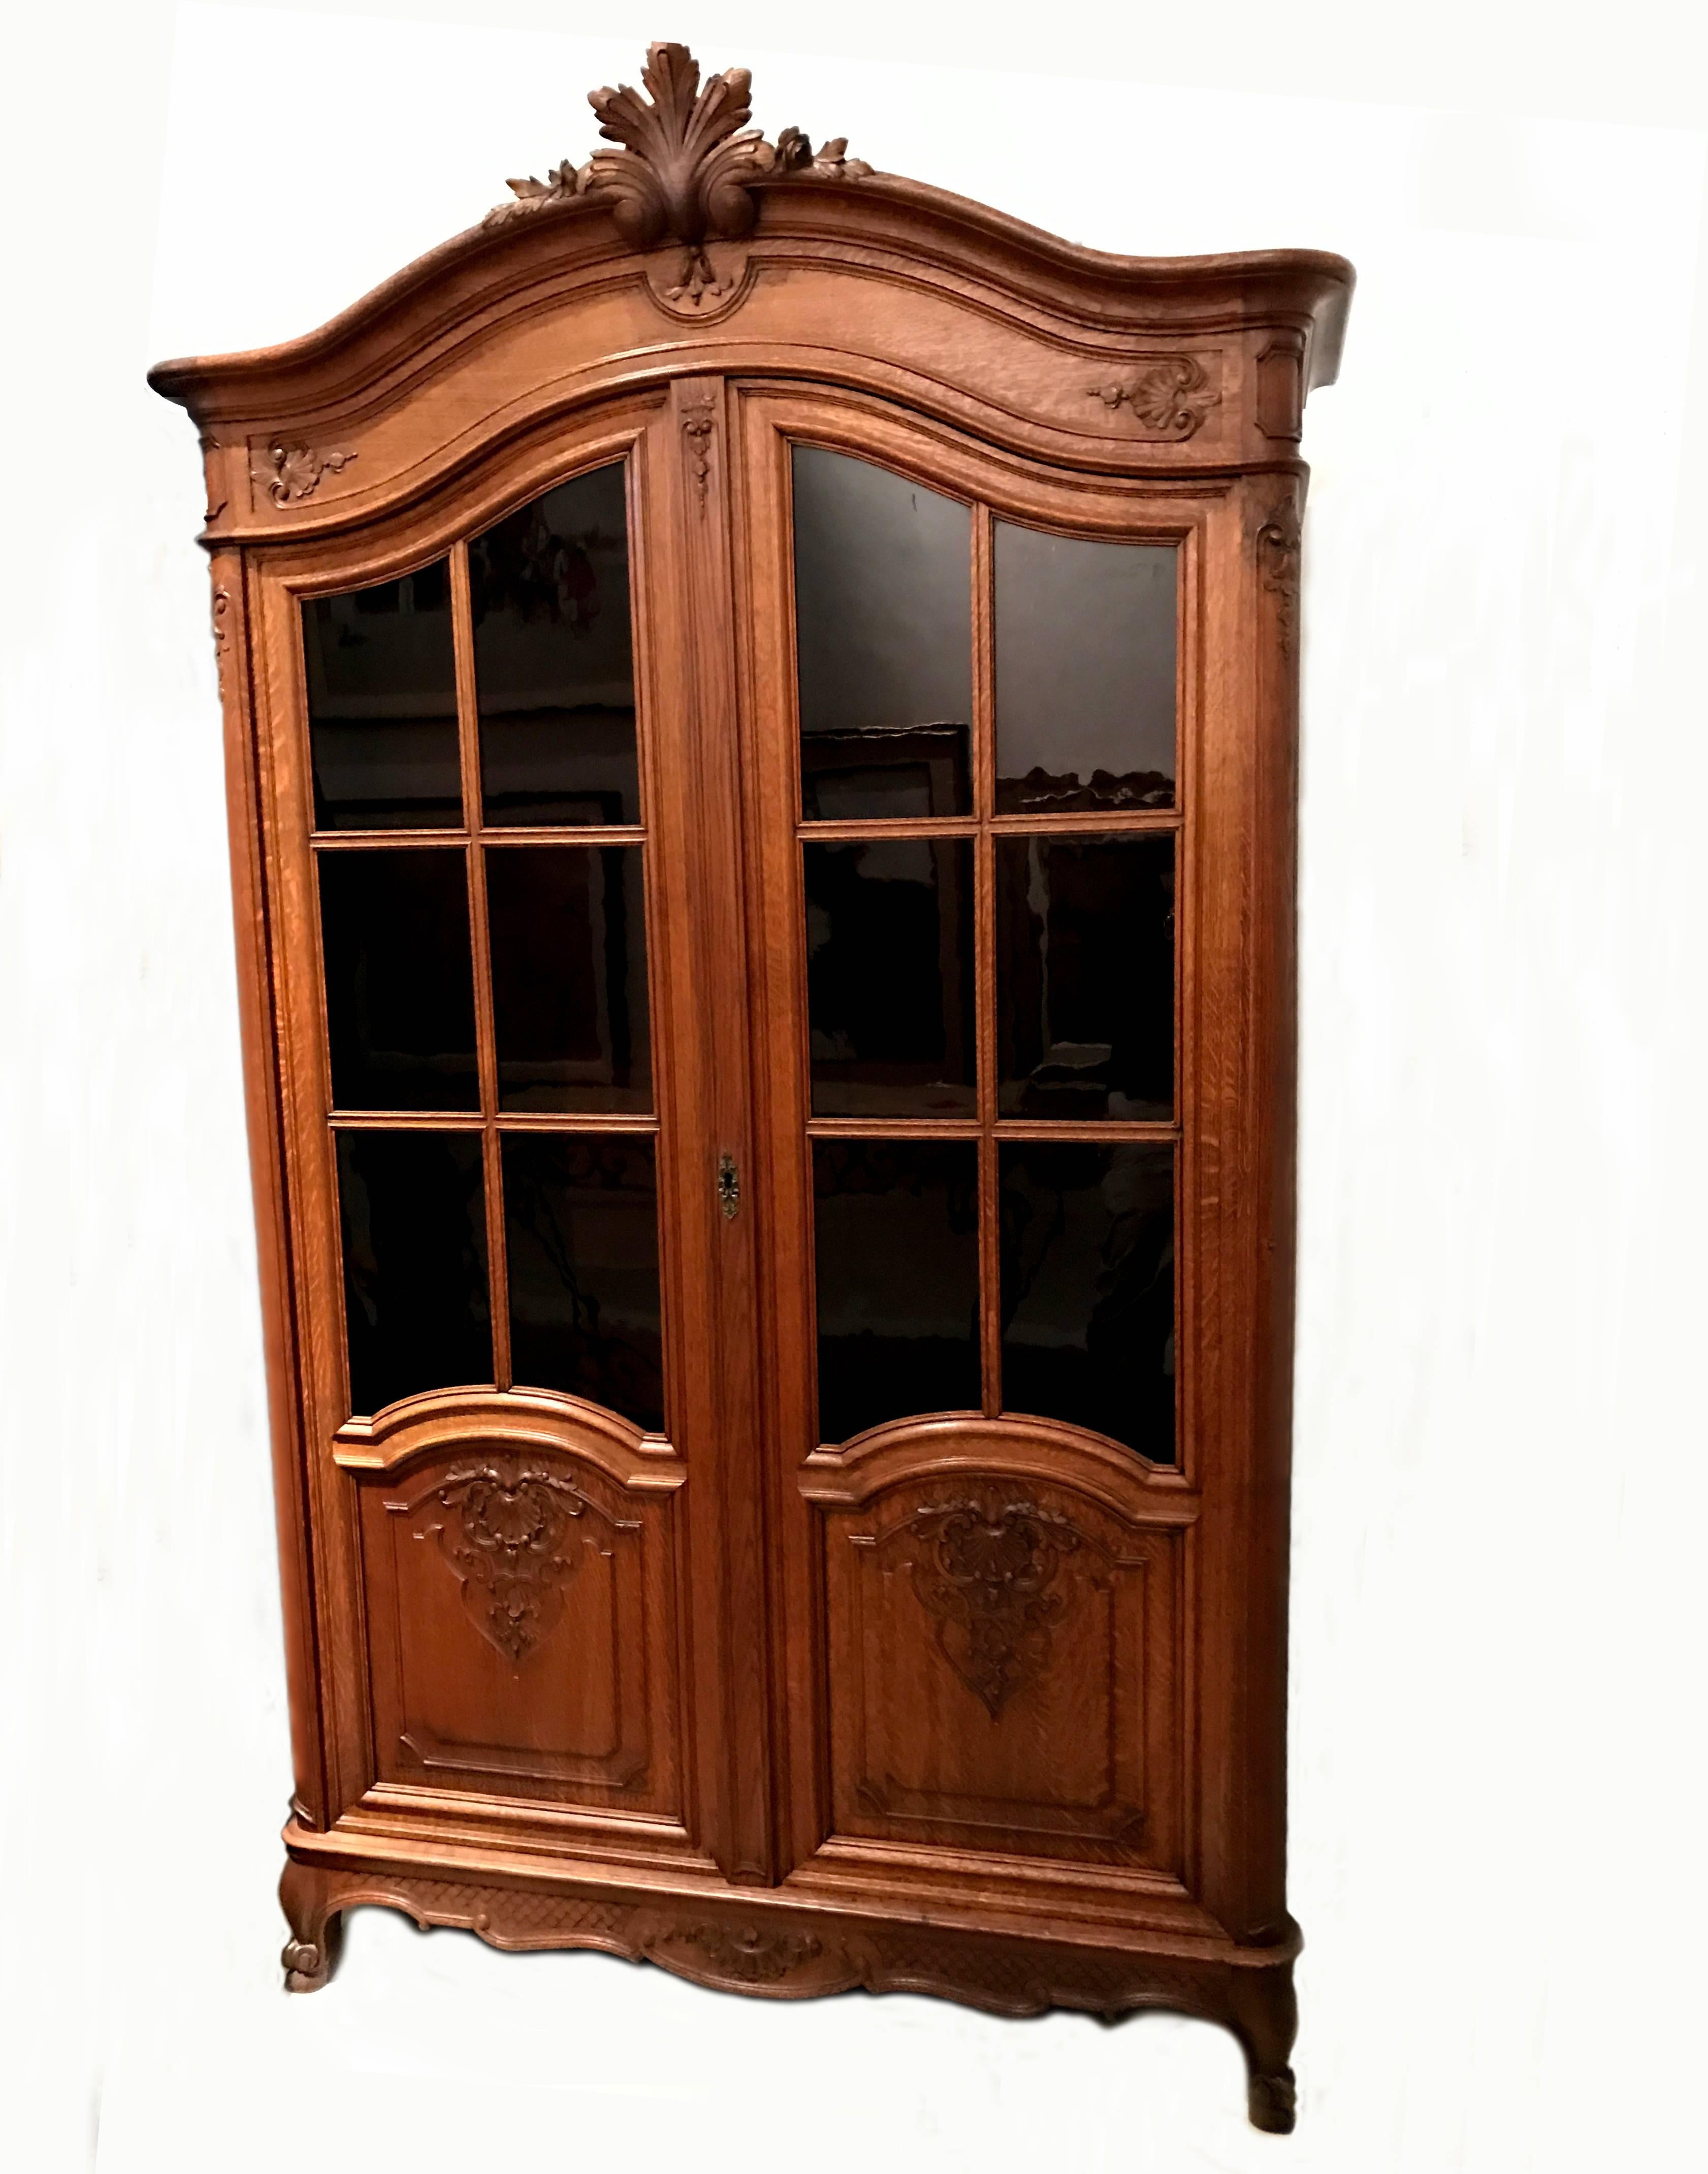 A superb pair of vintage French Regency armoires with pane glass doors and carved Acanthus leaf crown mount. Both armoires are in near perfect condition and are exactly the same dimension and design. 

The original interiors were recently